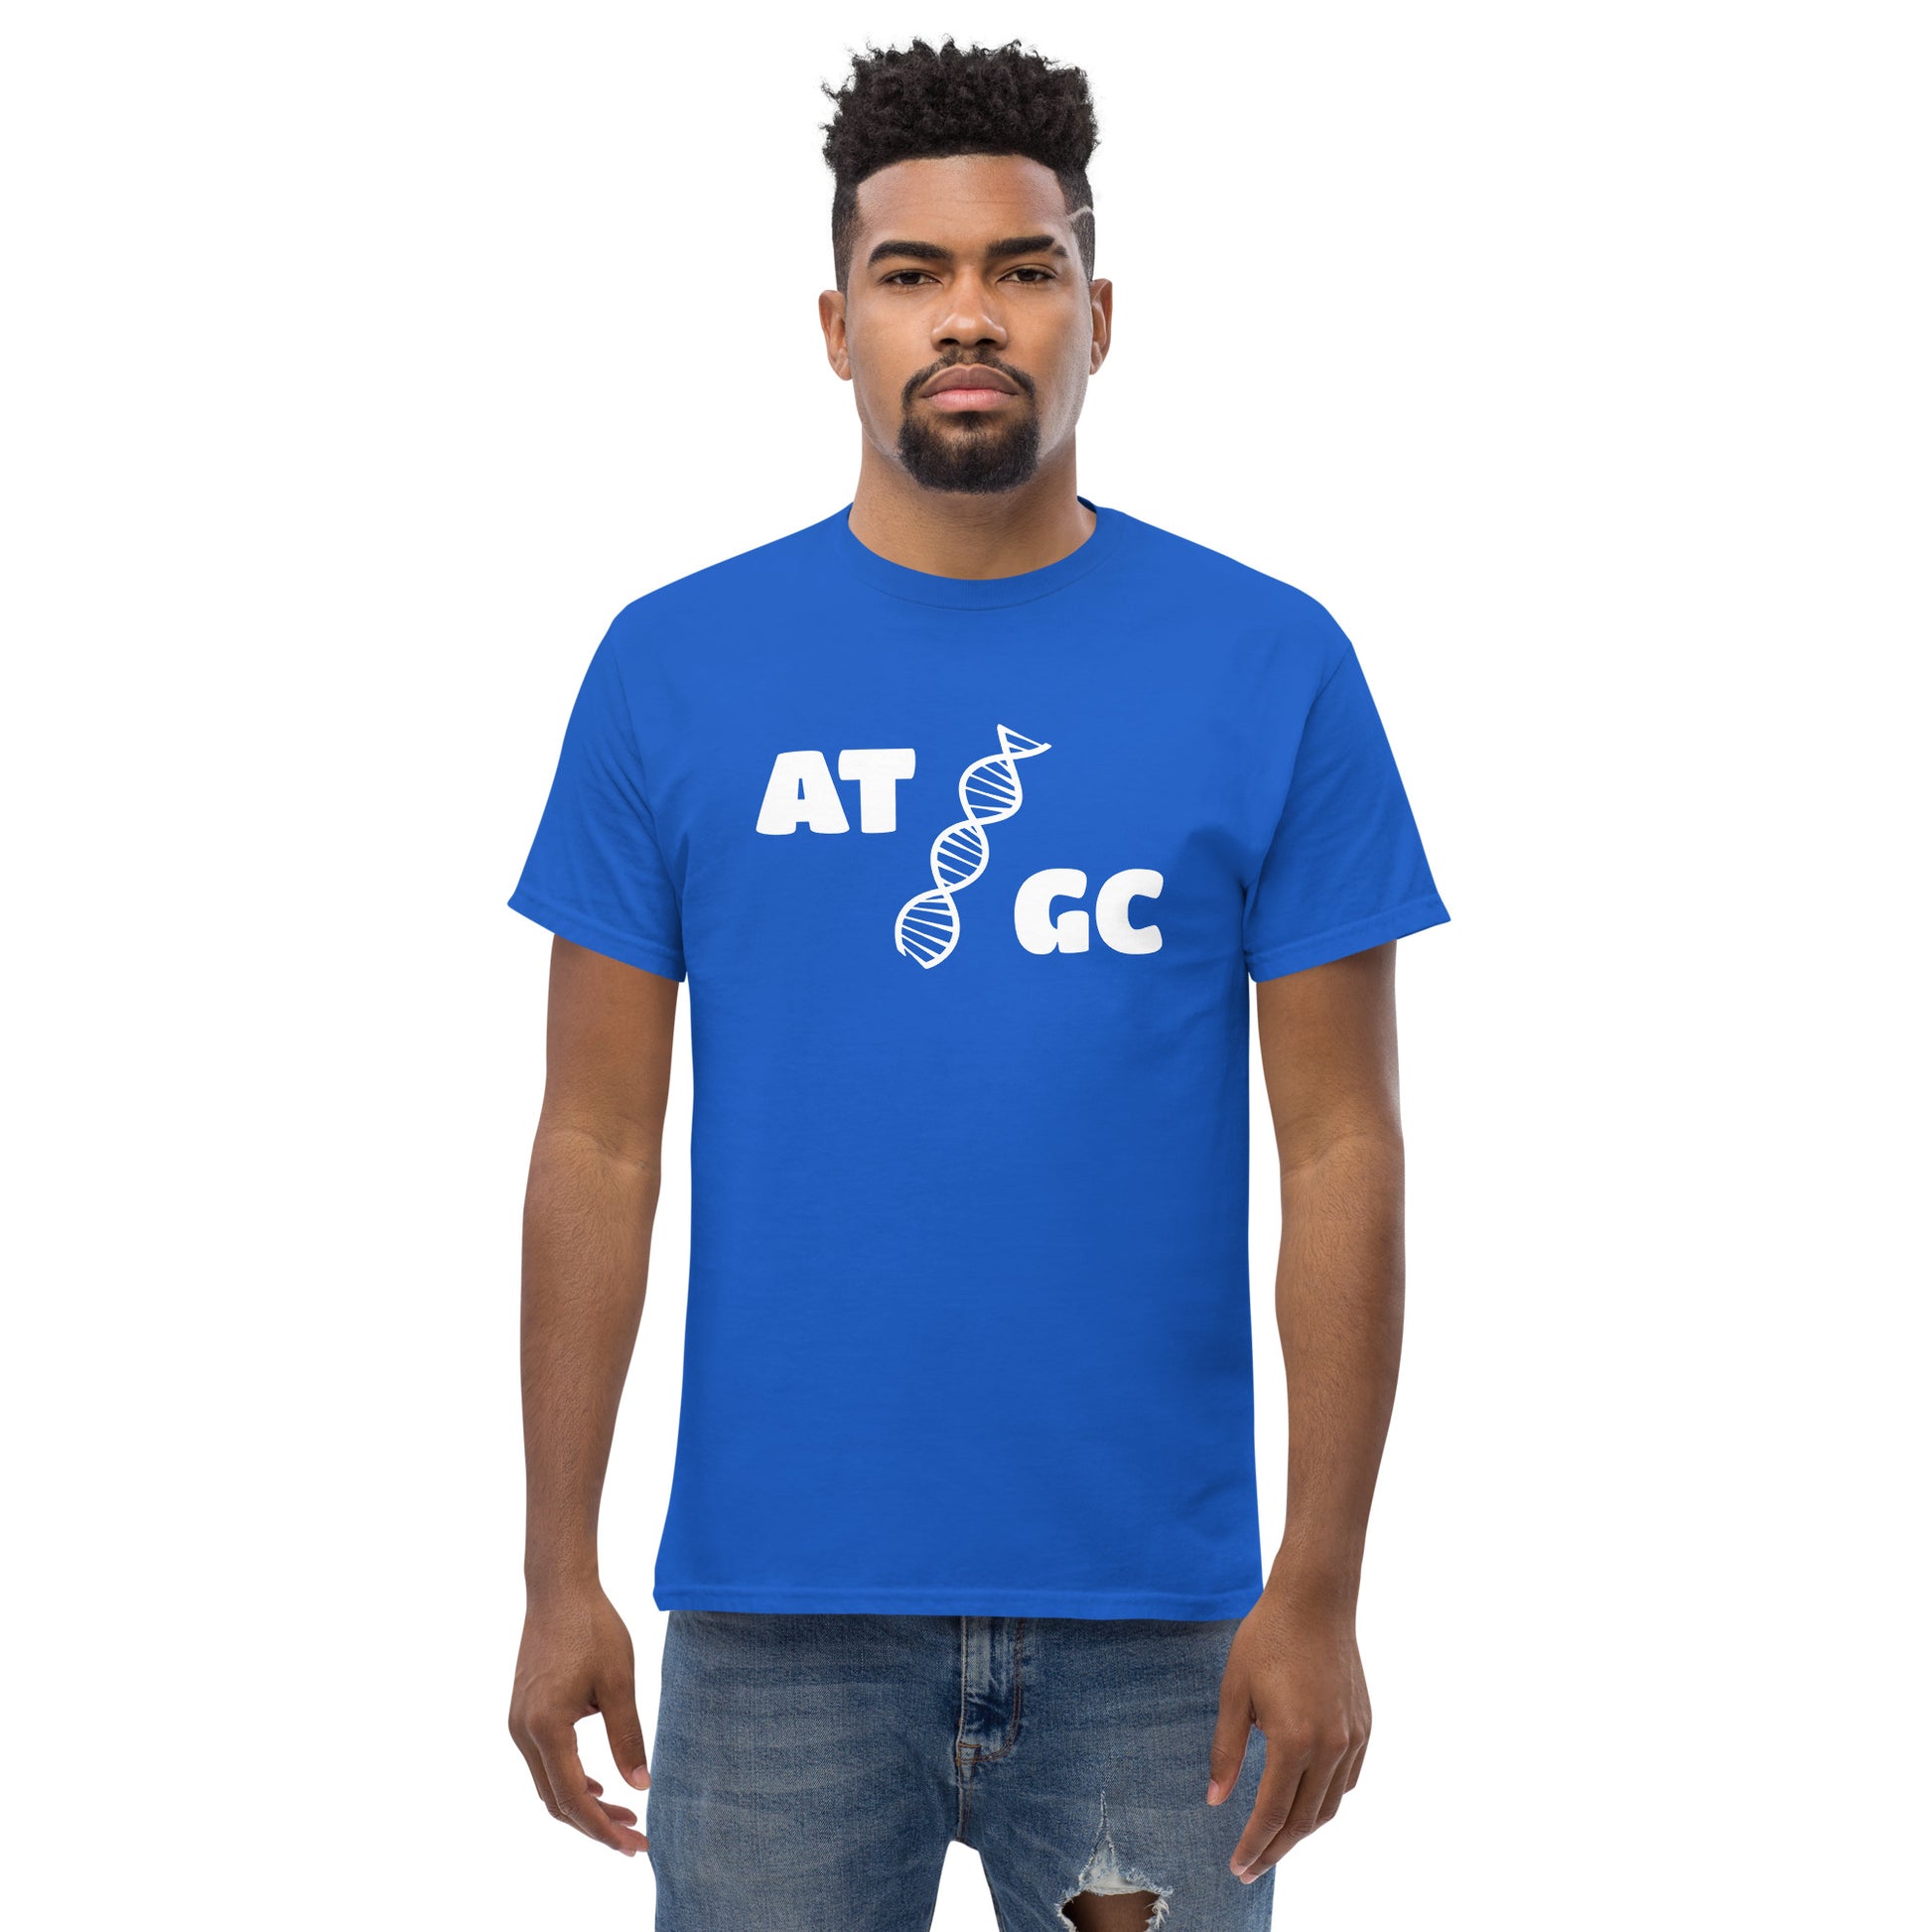 Men with royal blue t-shirt with image of a DNA string and the text "ATGC"